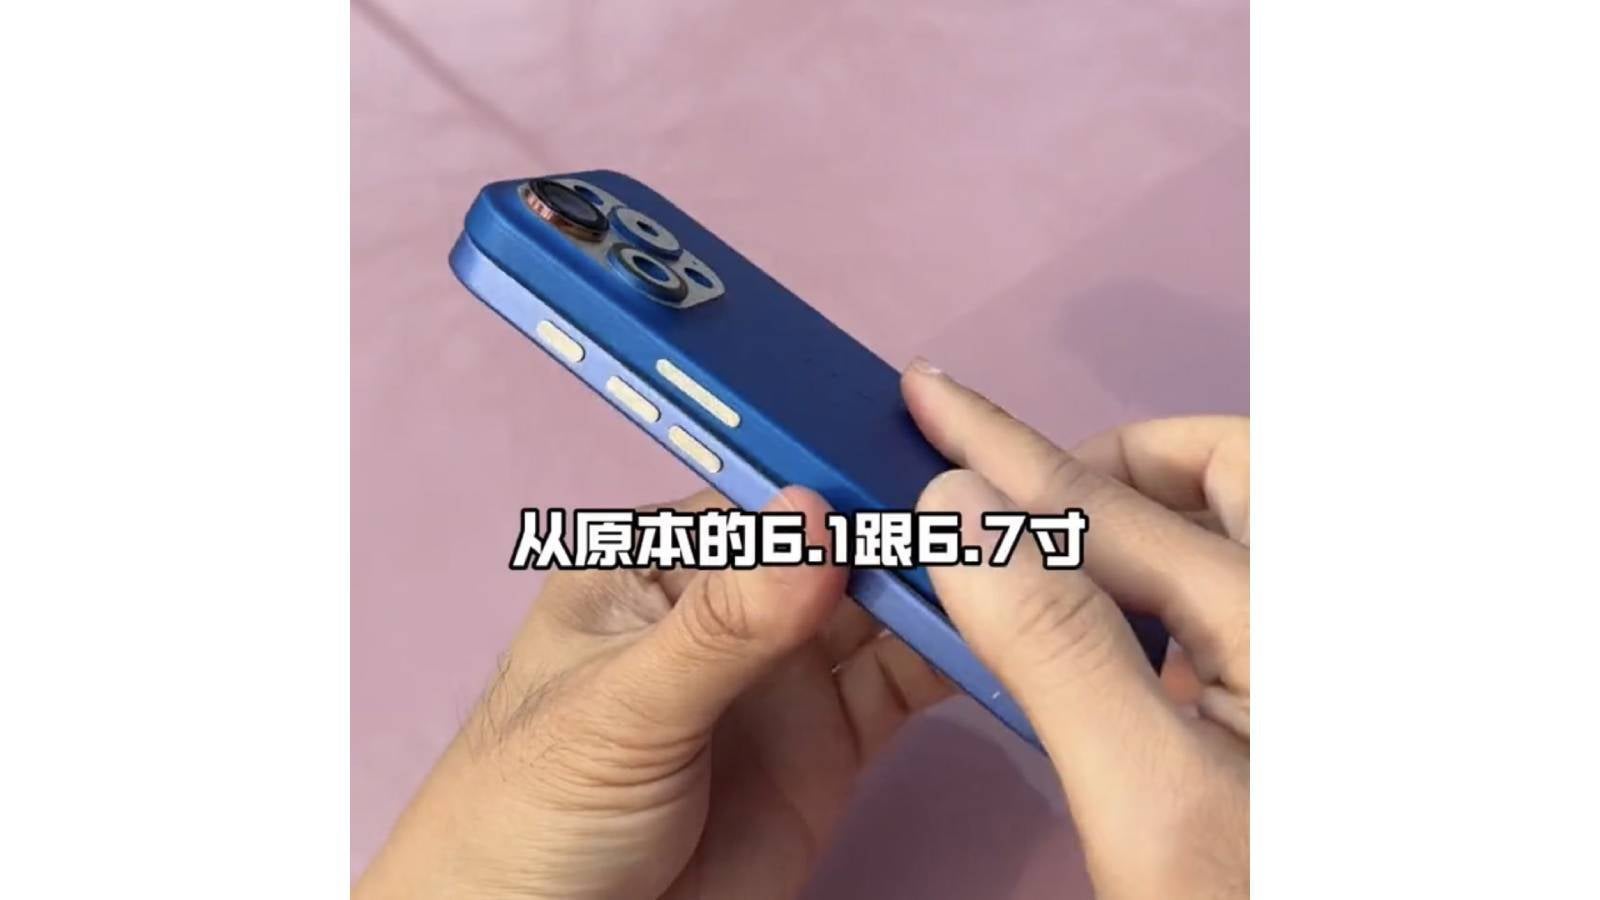 iPhone 16 Pro's customizable action button could be a bit bigger - Few iPhone 16 surprises left as images of dummy units, cases and new color variants leaked